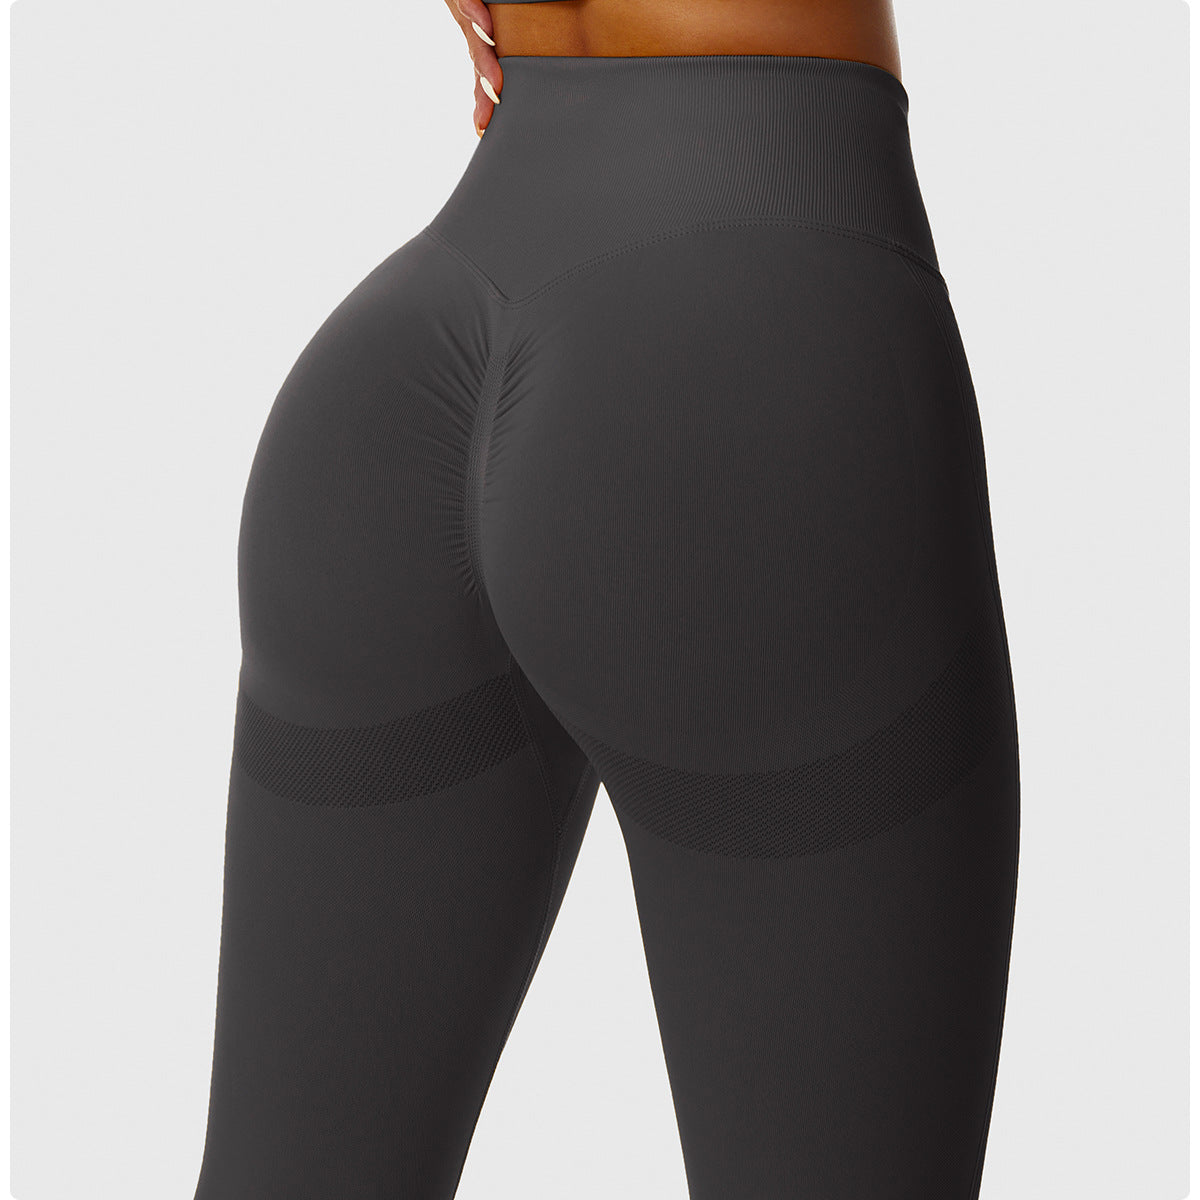 
                  
                    Seamless Peach Hip Yoga Pants Waist Tight Sports Bottoming Trousers Nude Feel Hip Raise Fitness Pants
                  
                